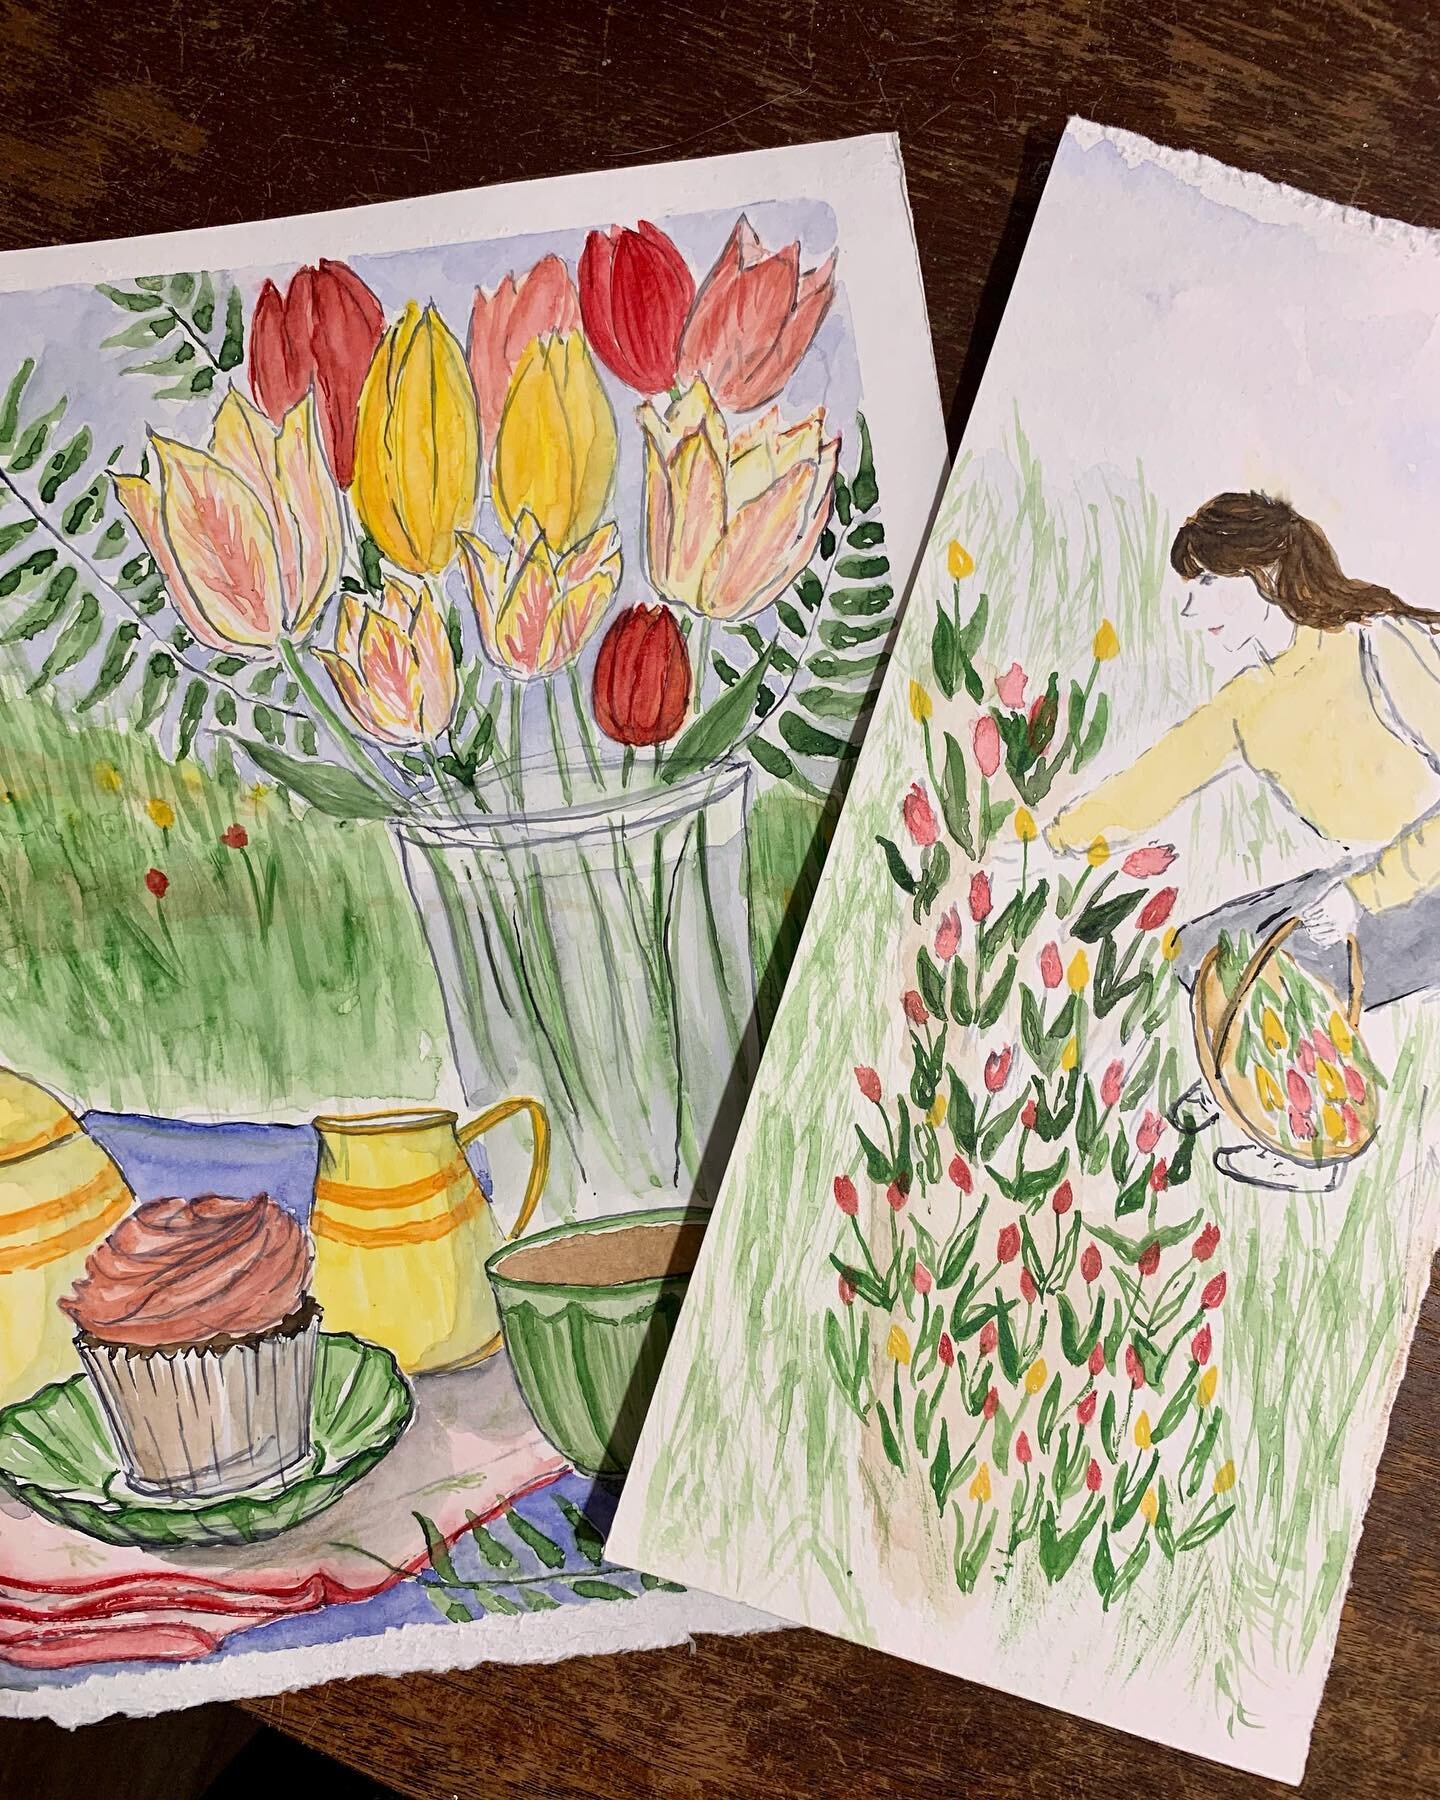 Been dreaming about tulips ever since I picked so many at @wickedtulips ✨🌷🌷🌷 #watercolor #illustration #inksketch #vintageillustration #vintagestyle #artist #smallbusiness